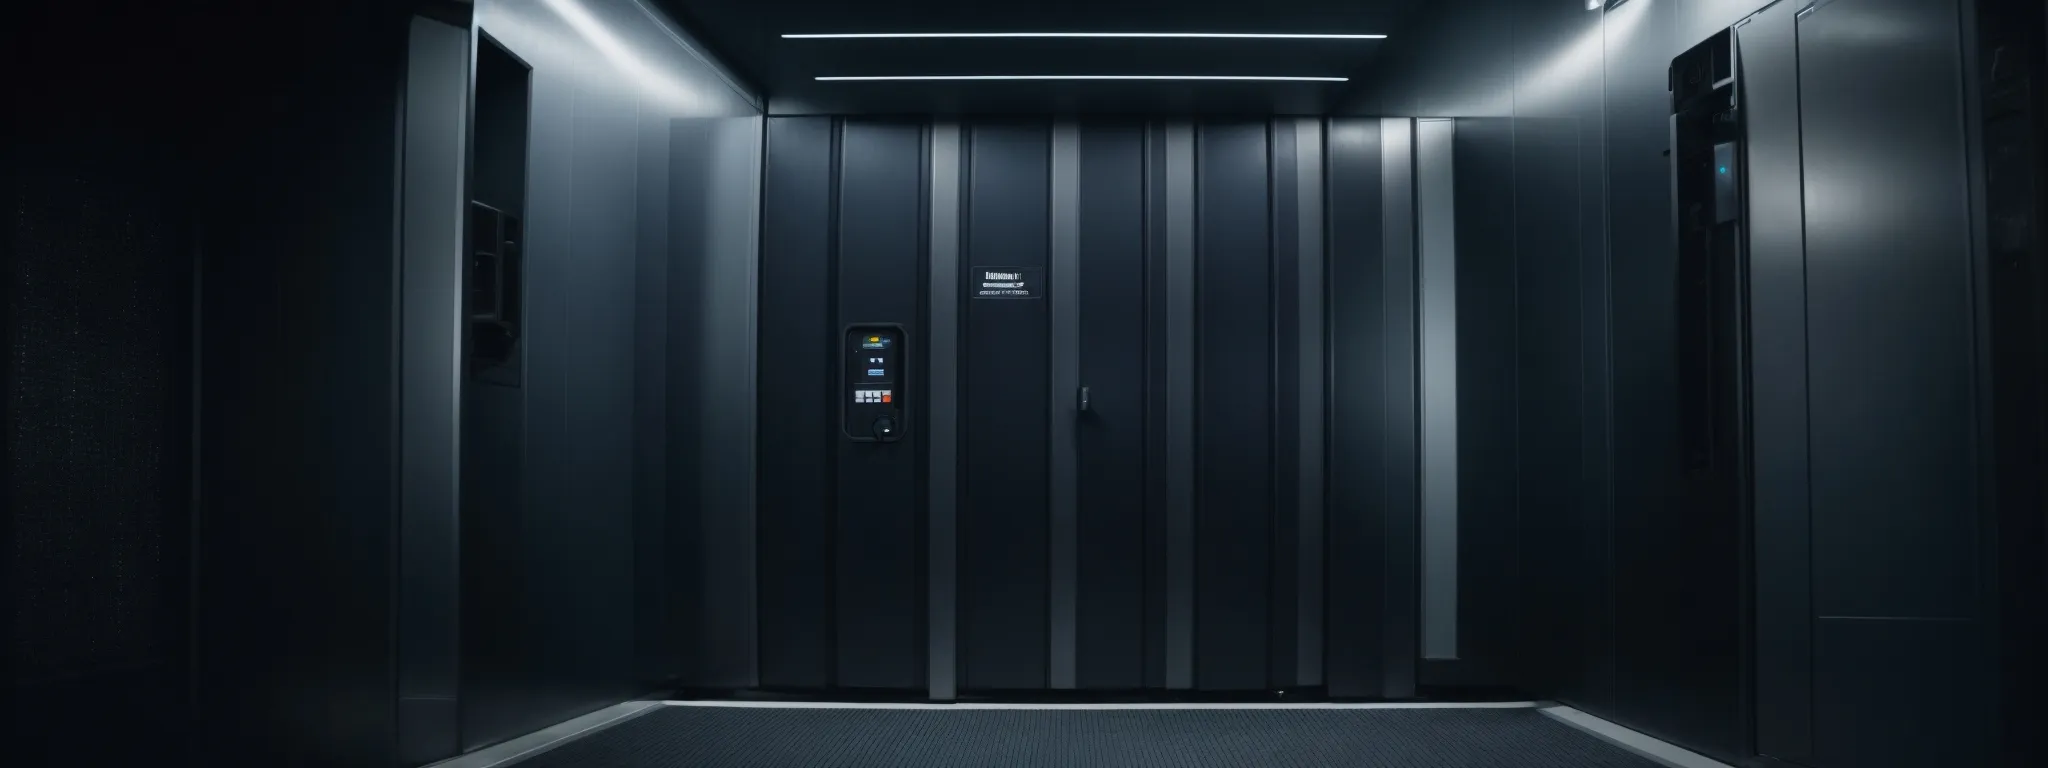 a secure vault door closing on a high-tech digital data center to symbolize impenetrable cybersecurity measures.